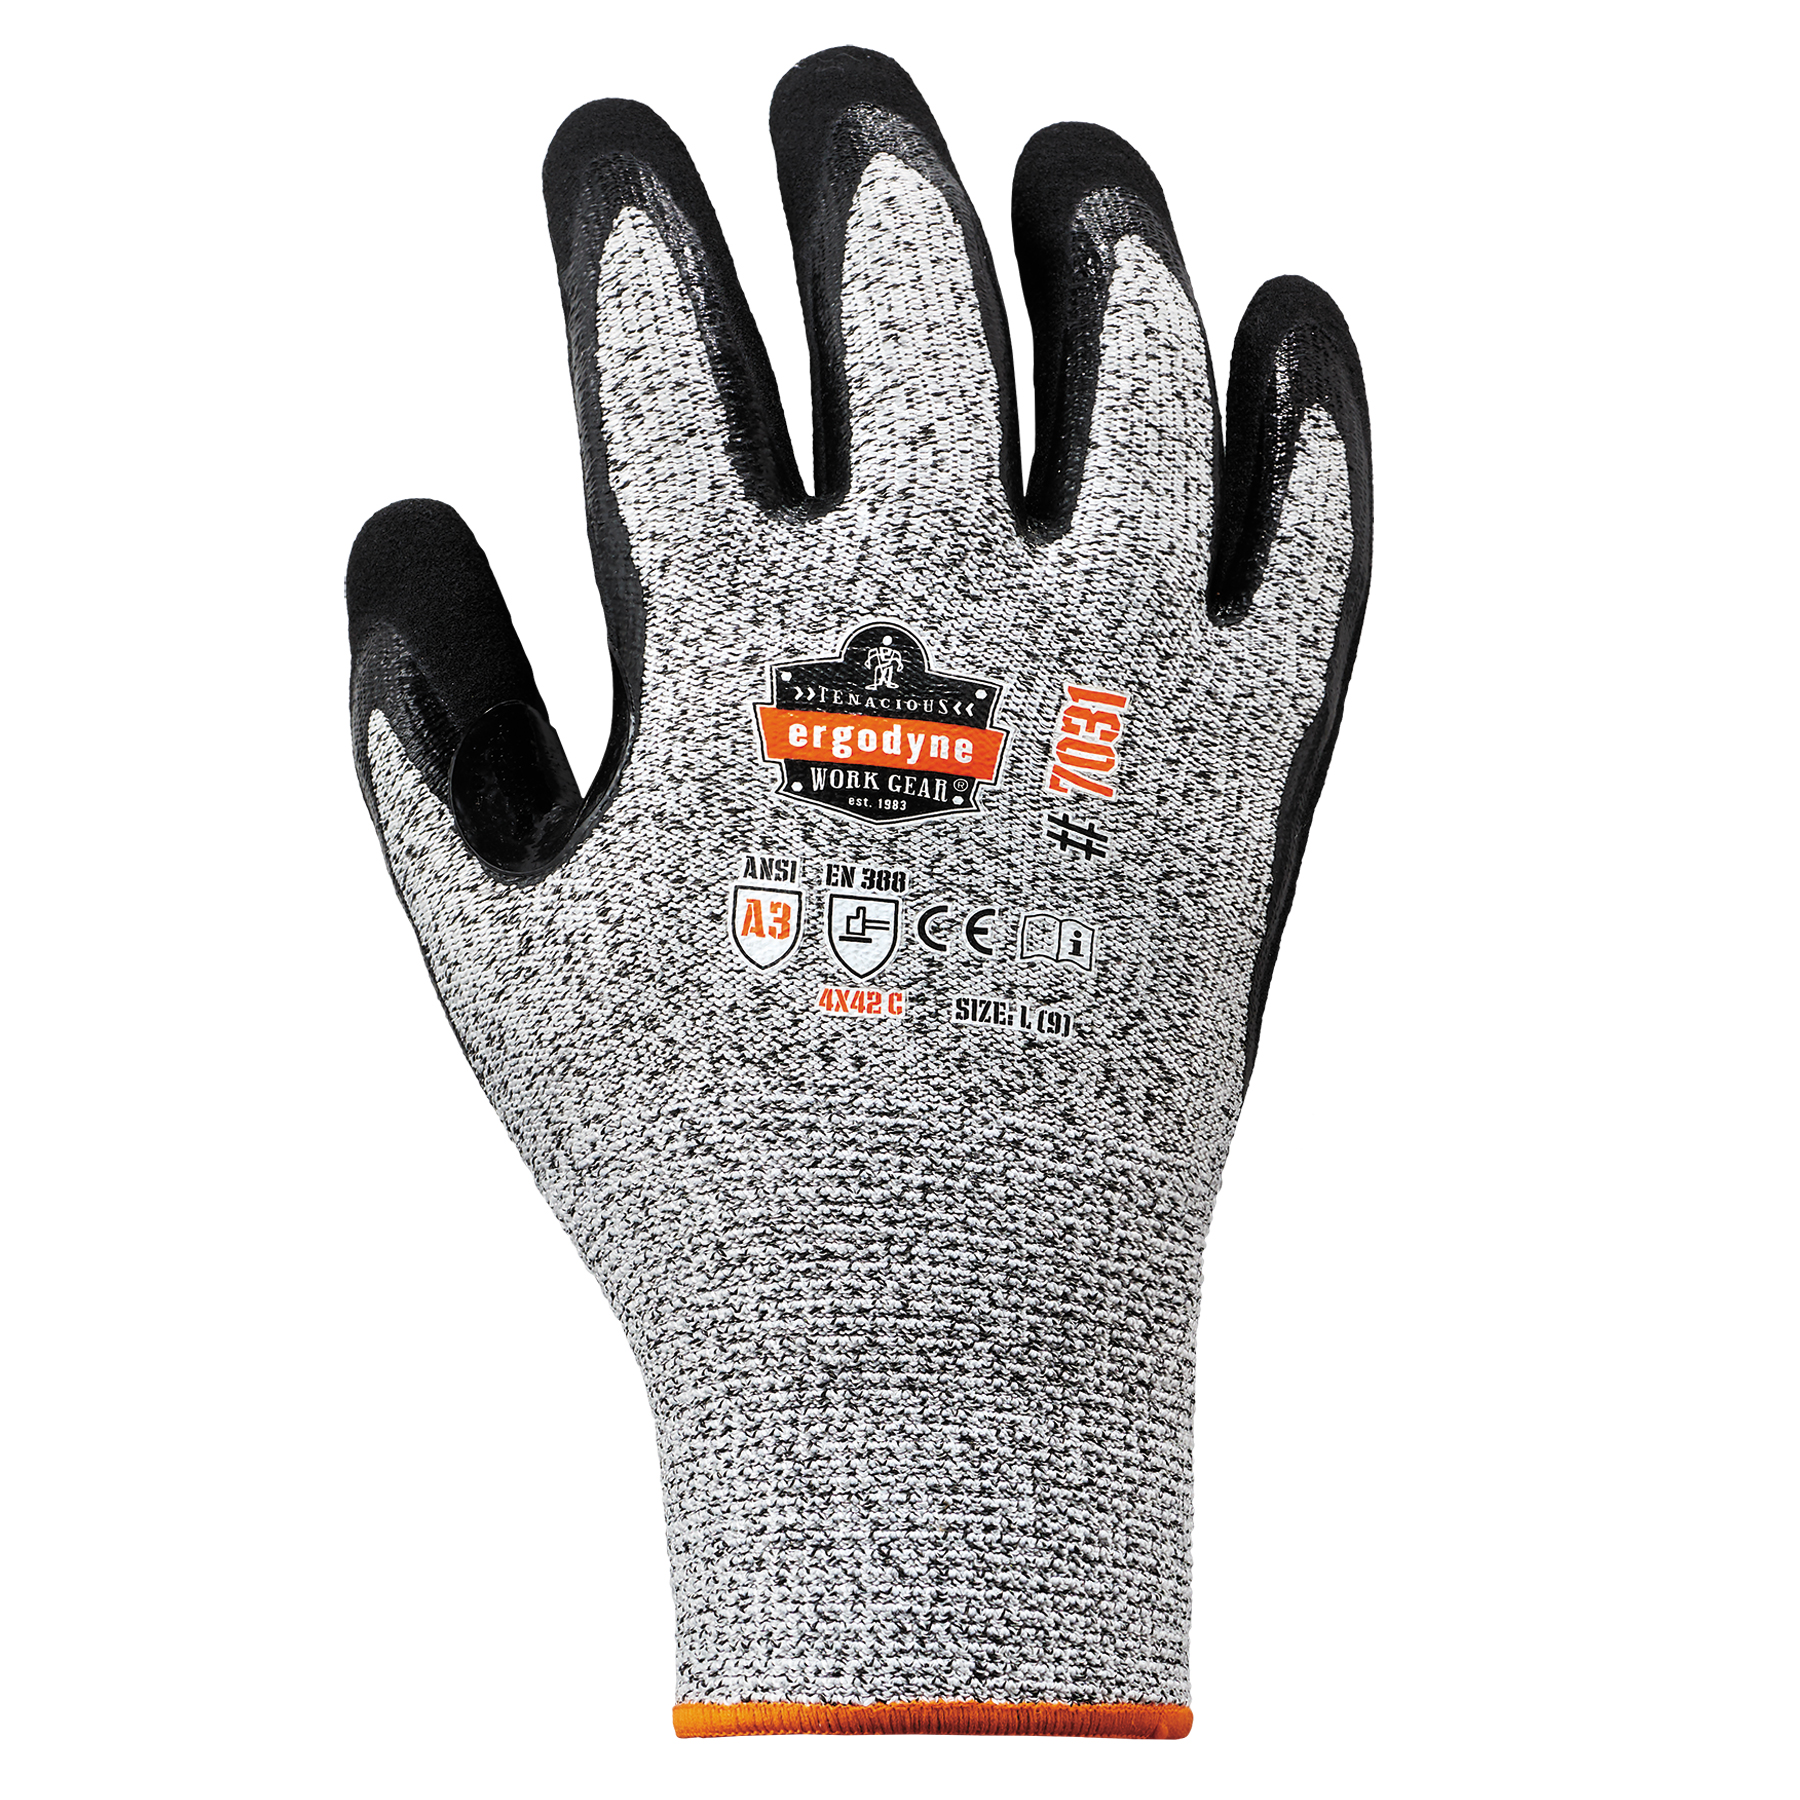 WORK GLOVES GREY NITRILE SAFETY GLOVES PERSONAL PROTECTIVE EQUIPMENT 